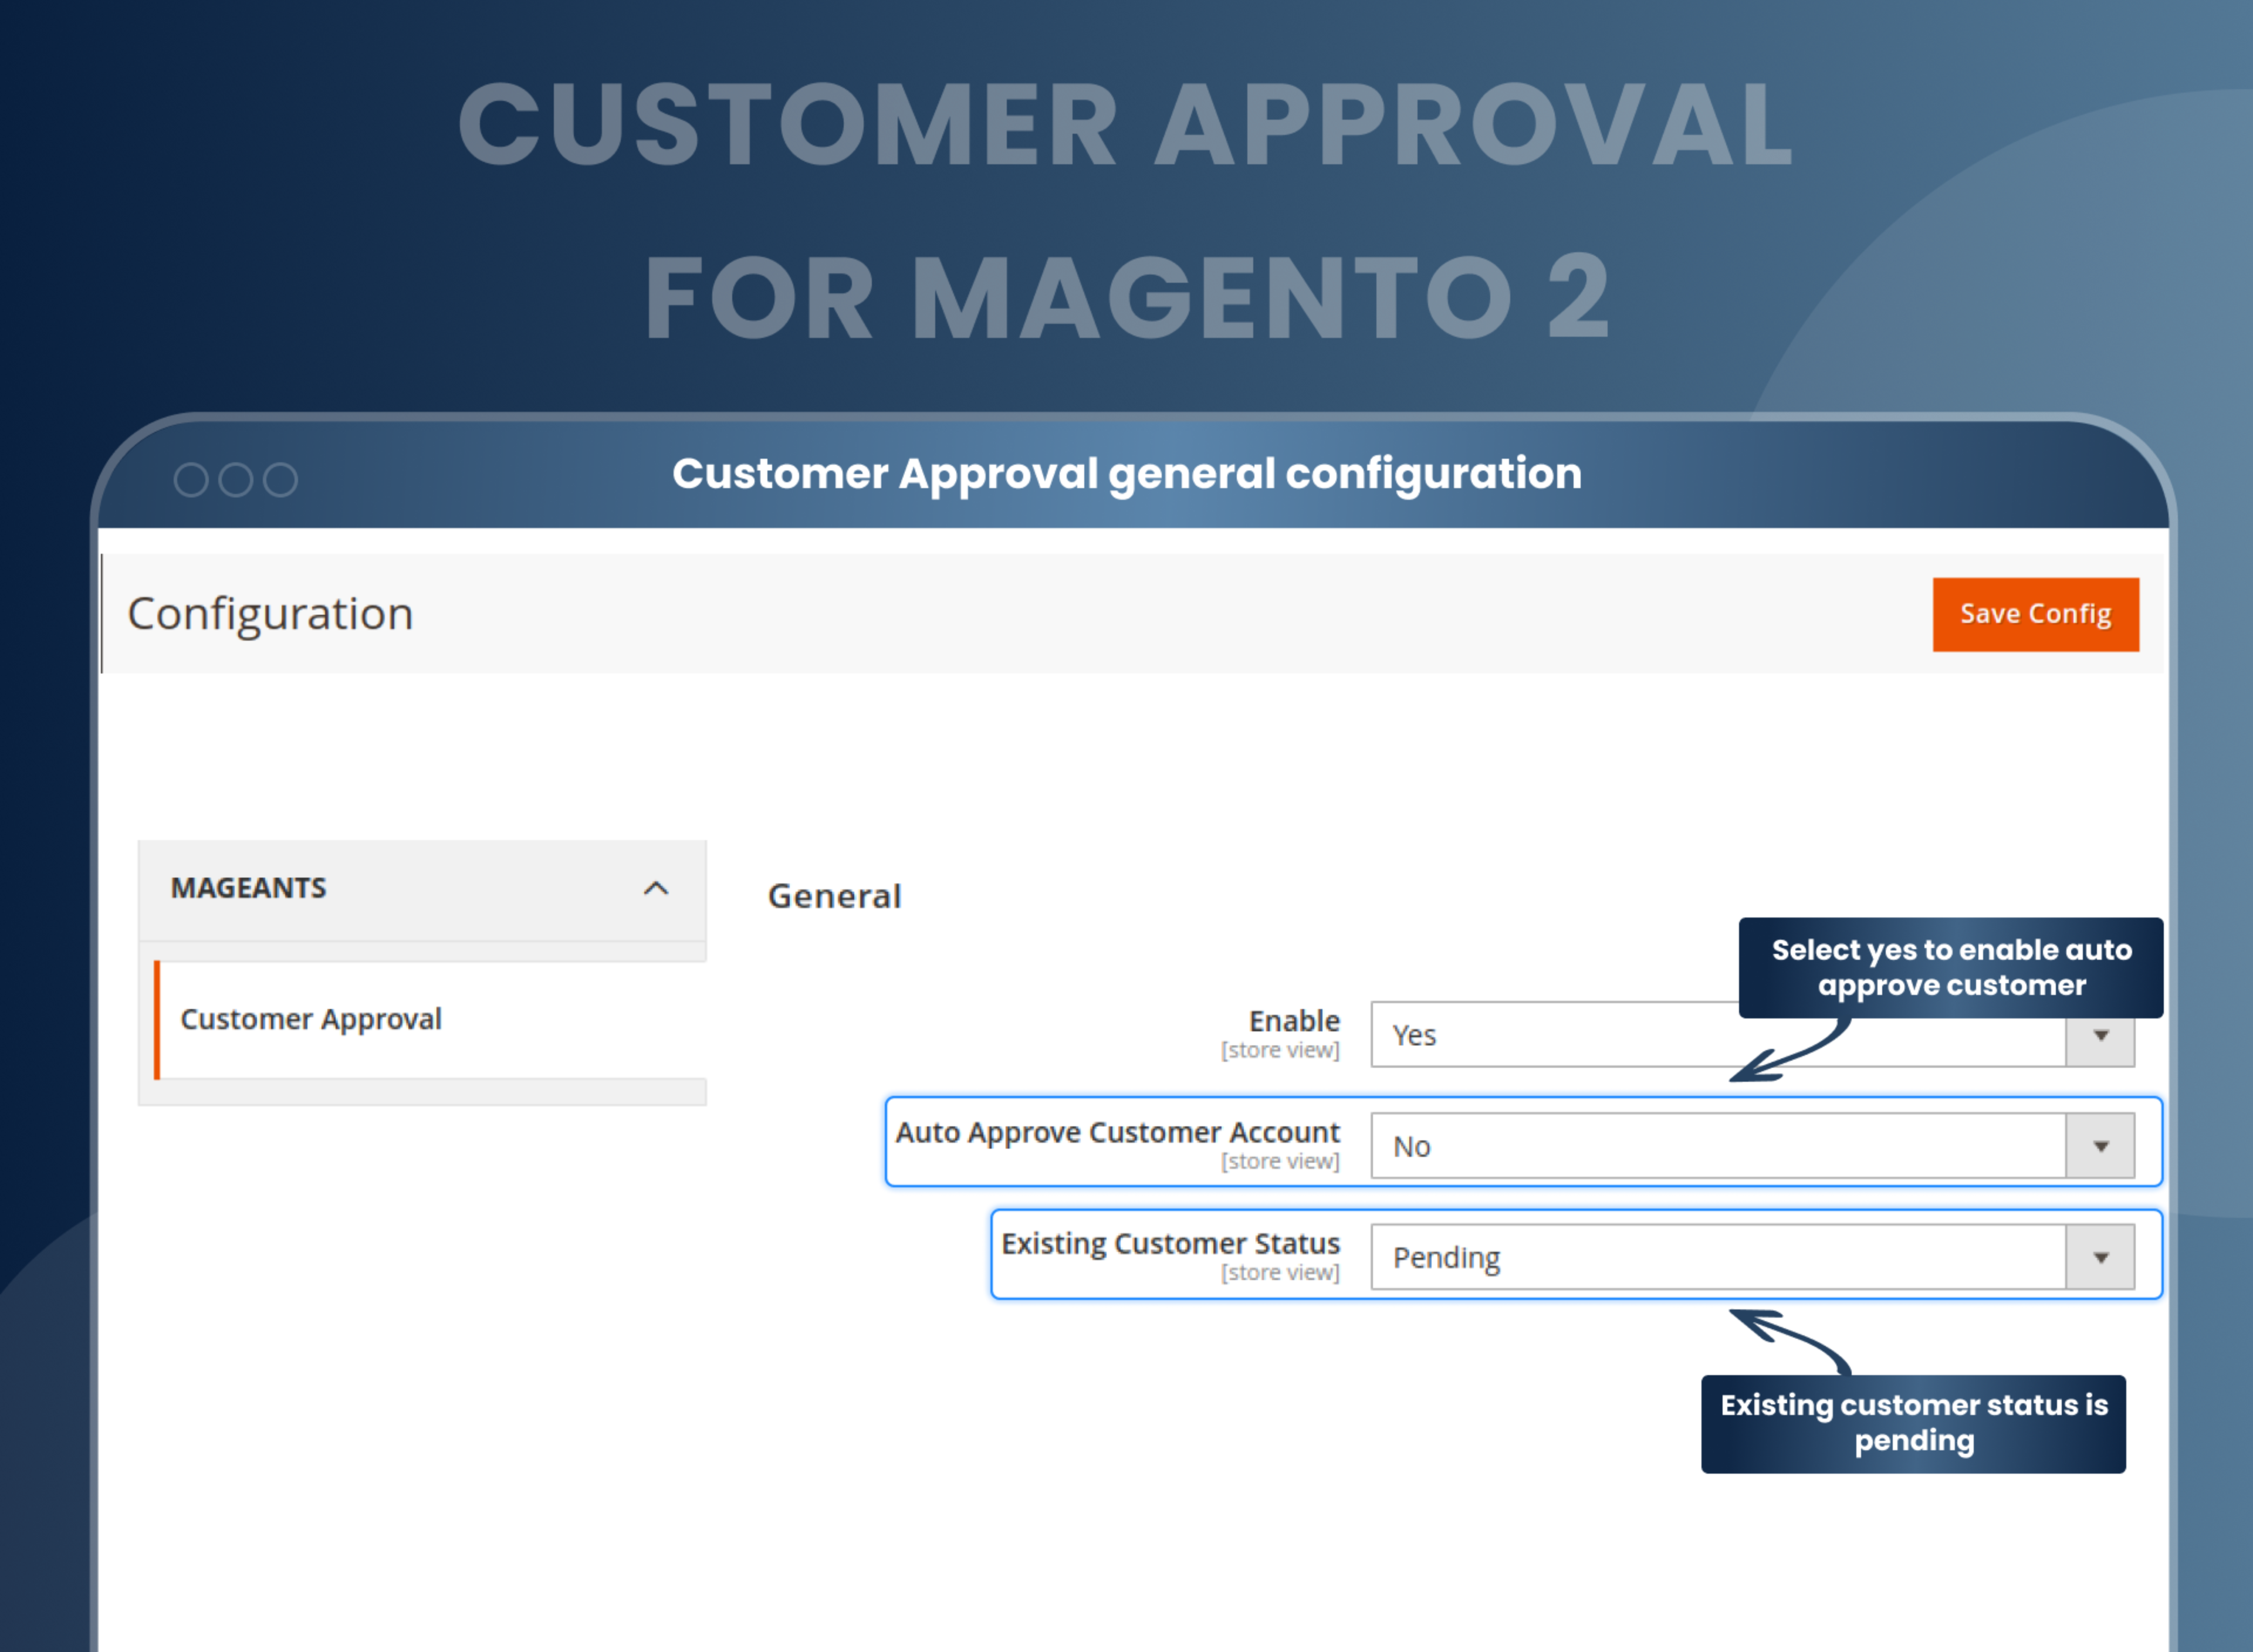 Customer Approval general configuration